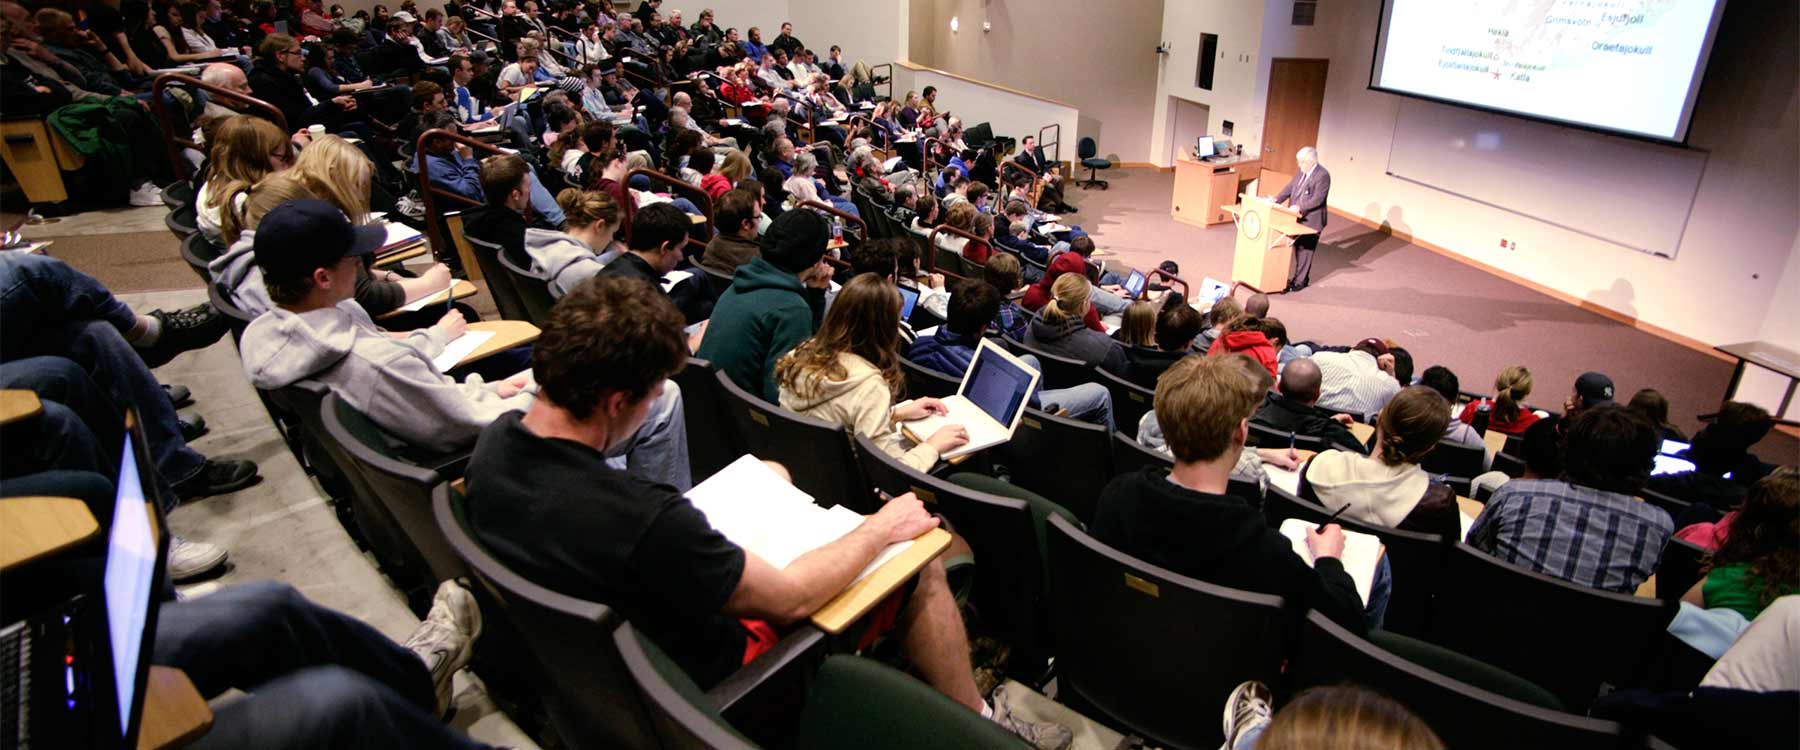 Students sit in a tiered lecture hall and take notes. At the front, a professor speaks.